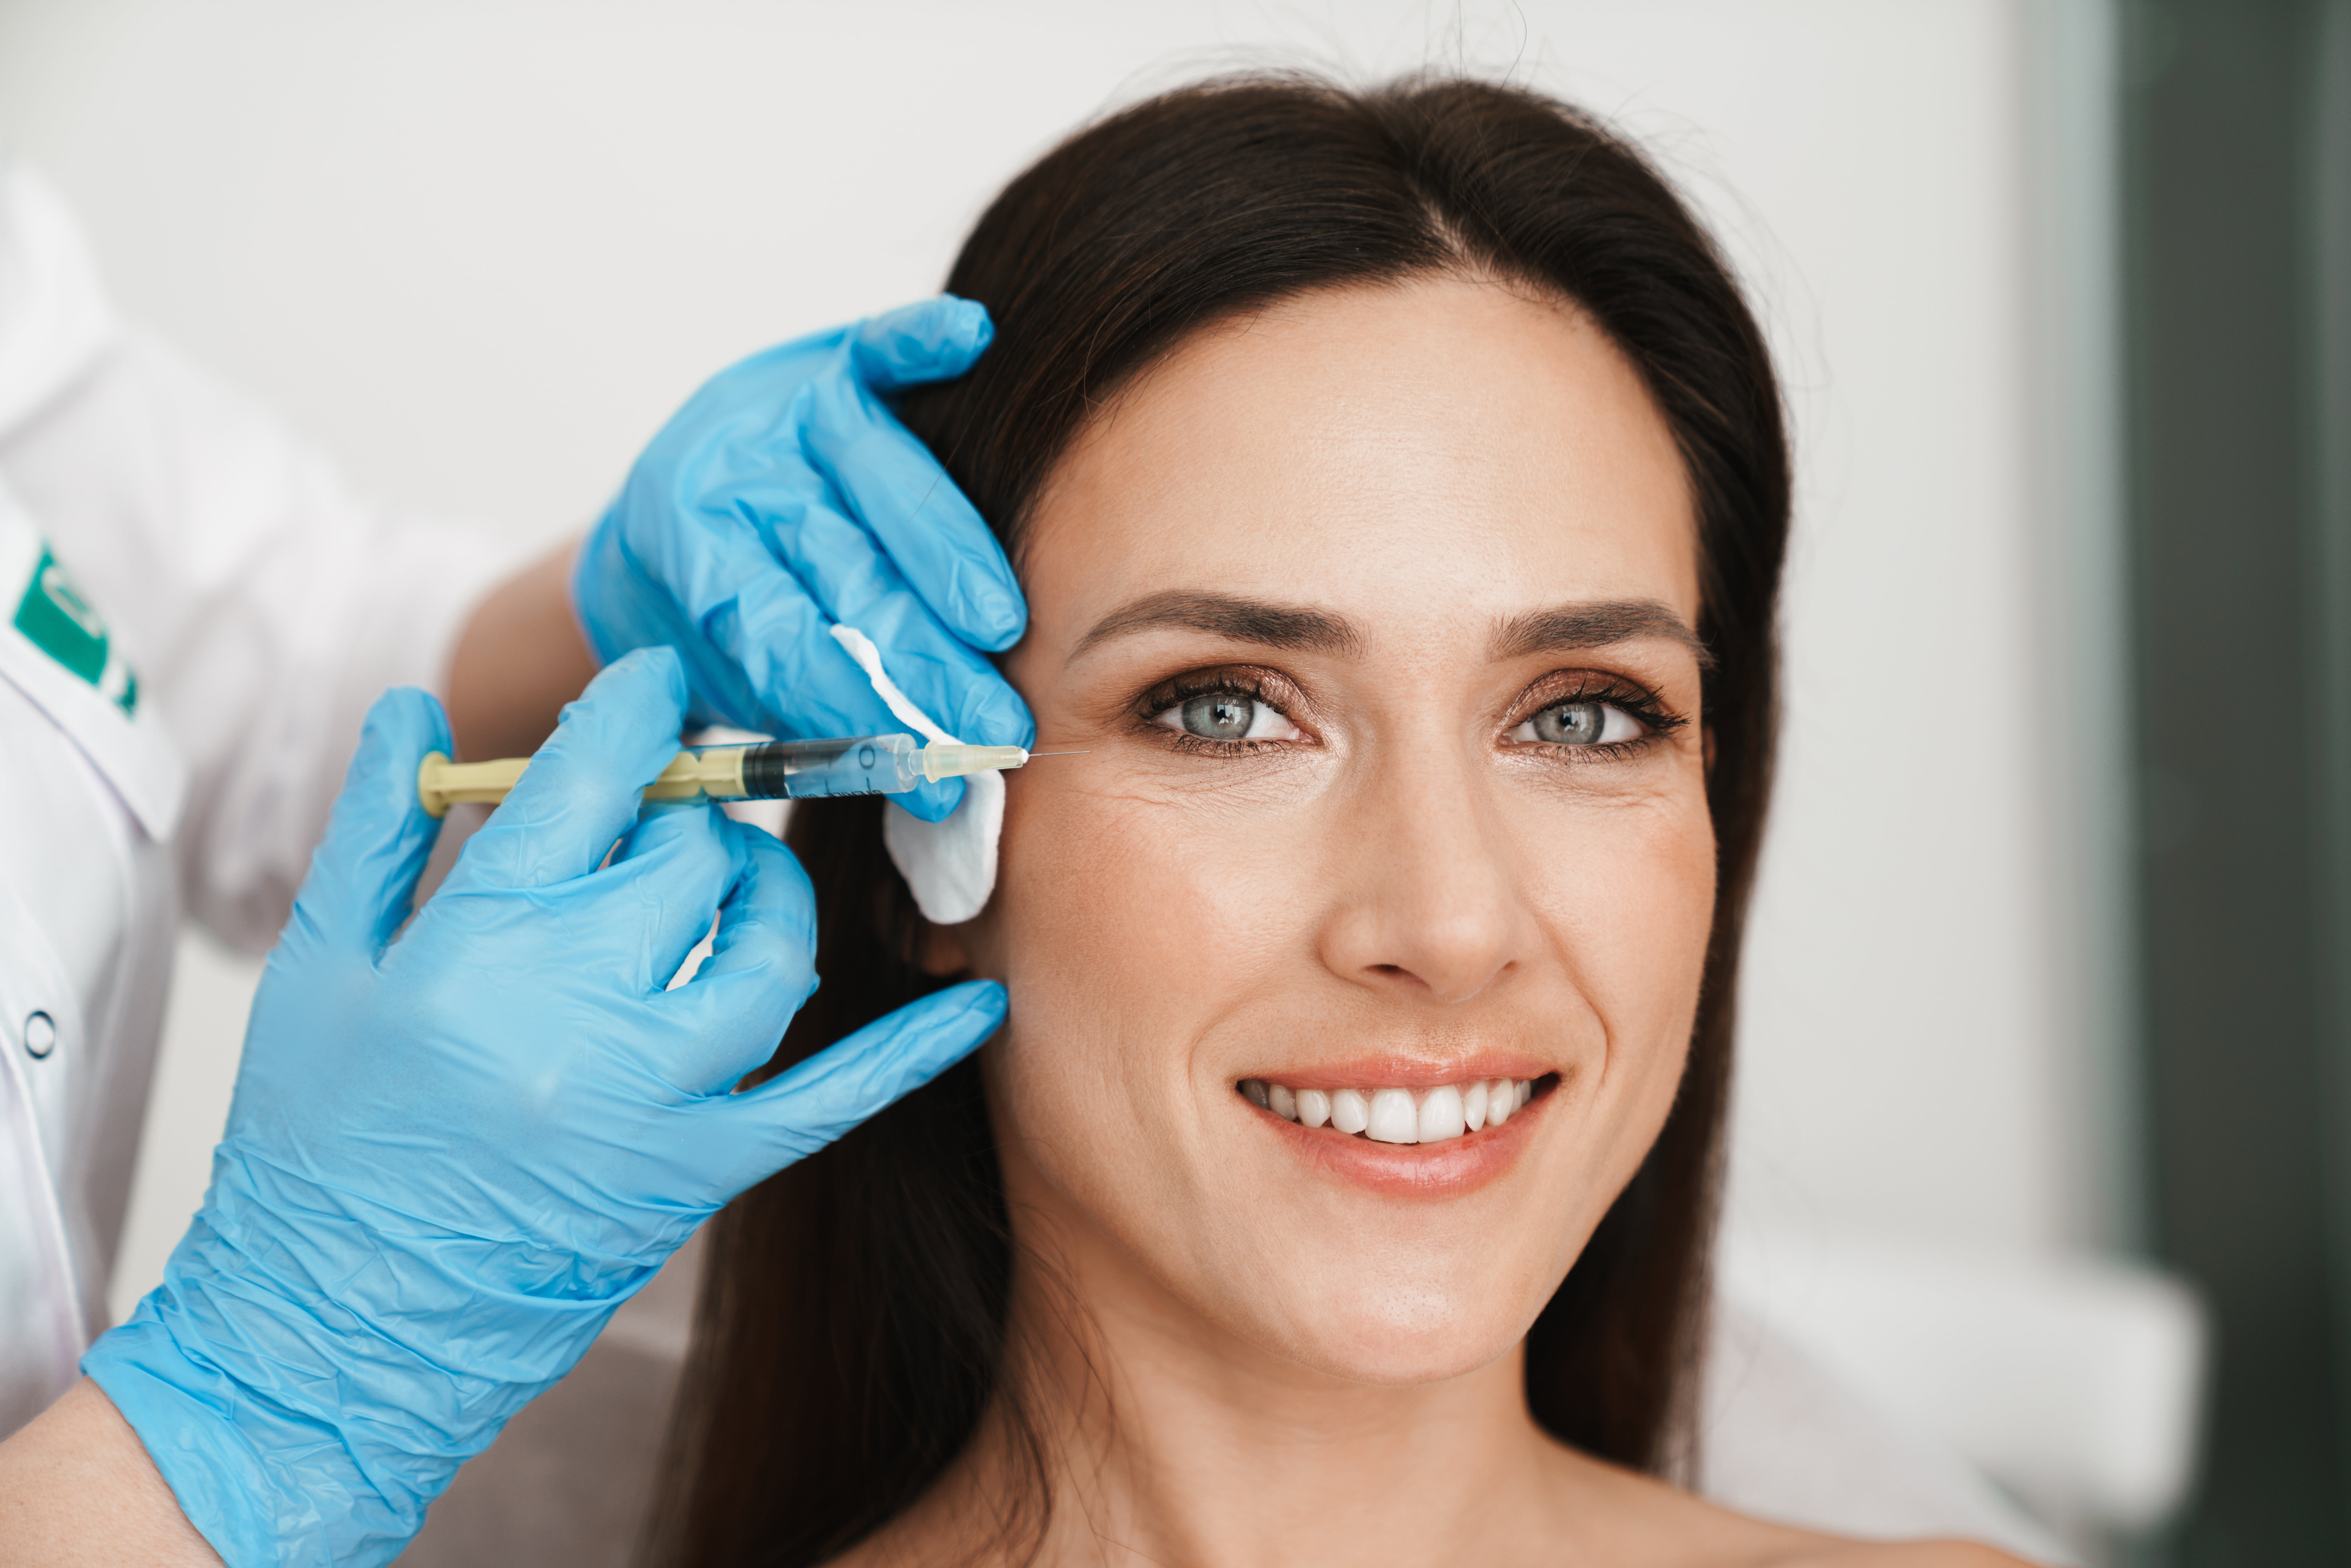 Revitalize Your Look with Botox The Fountain of Youth in a Syringe